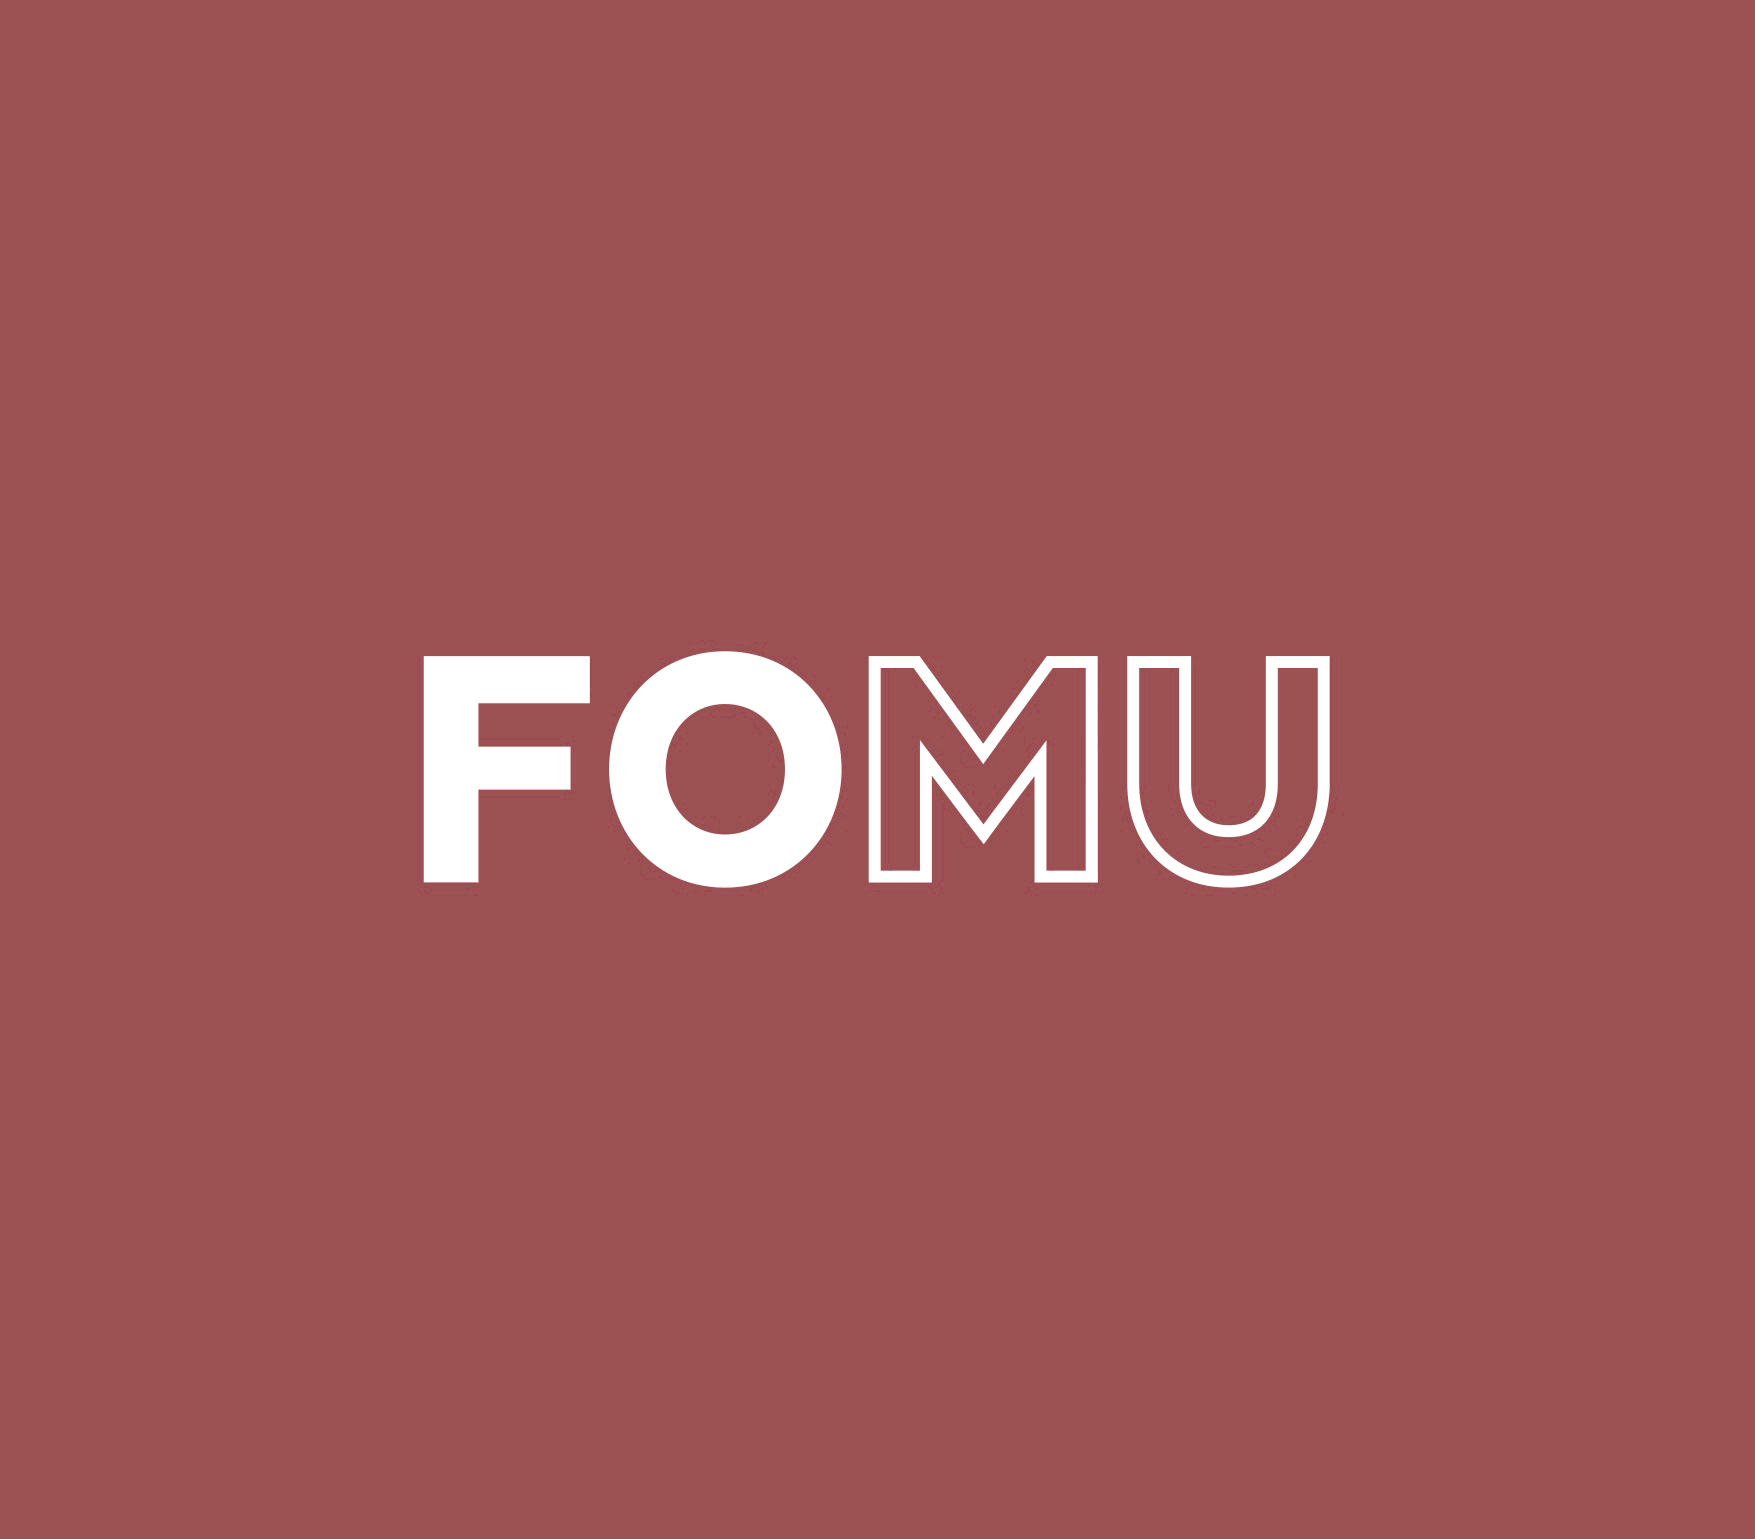 FOMU's new logo in red and white.